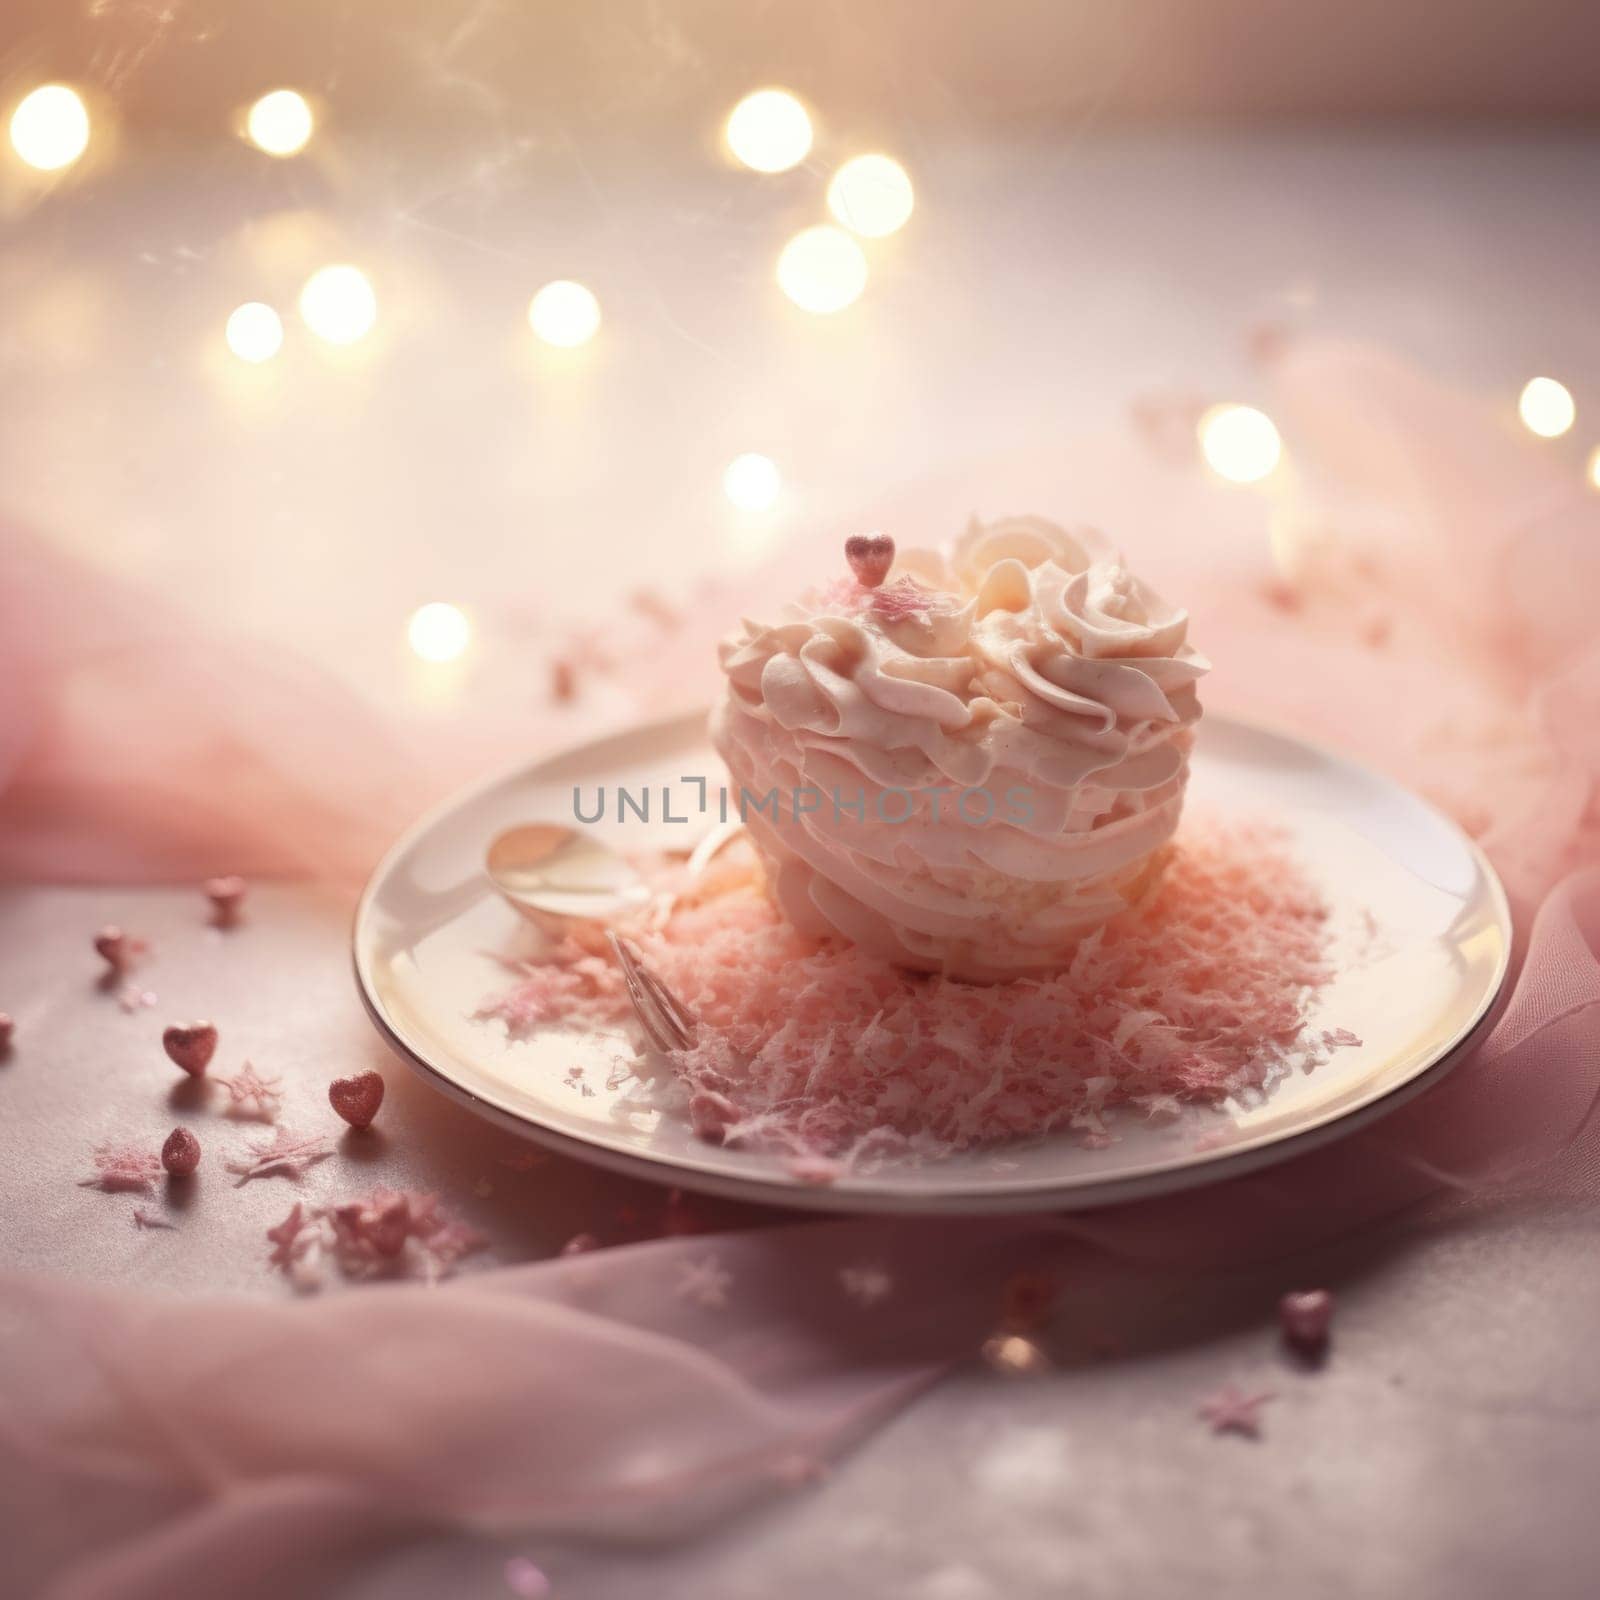 A cupcake on a plate with pink frosting